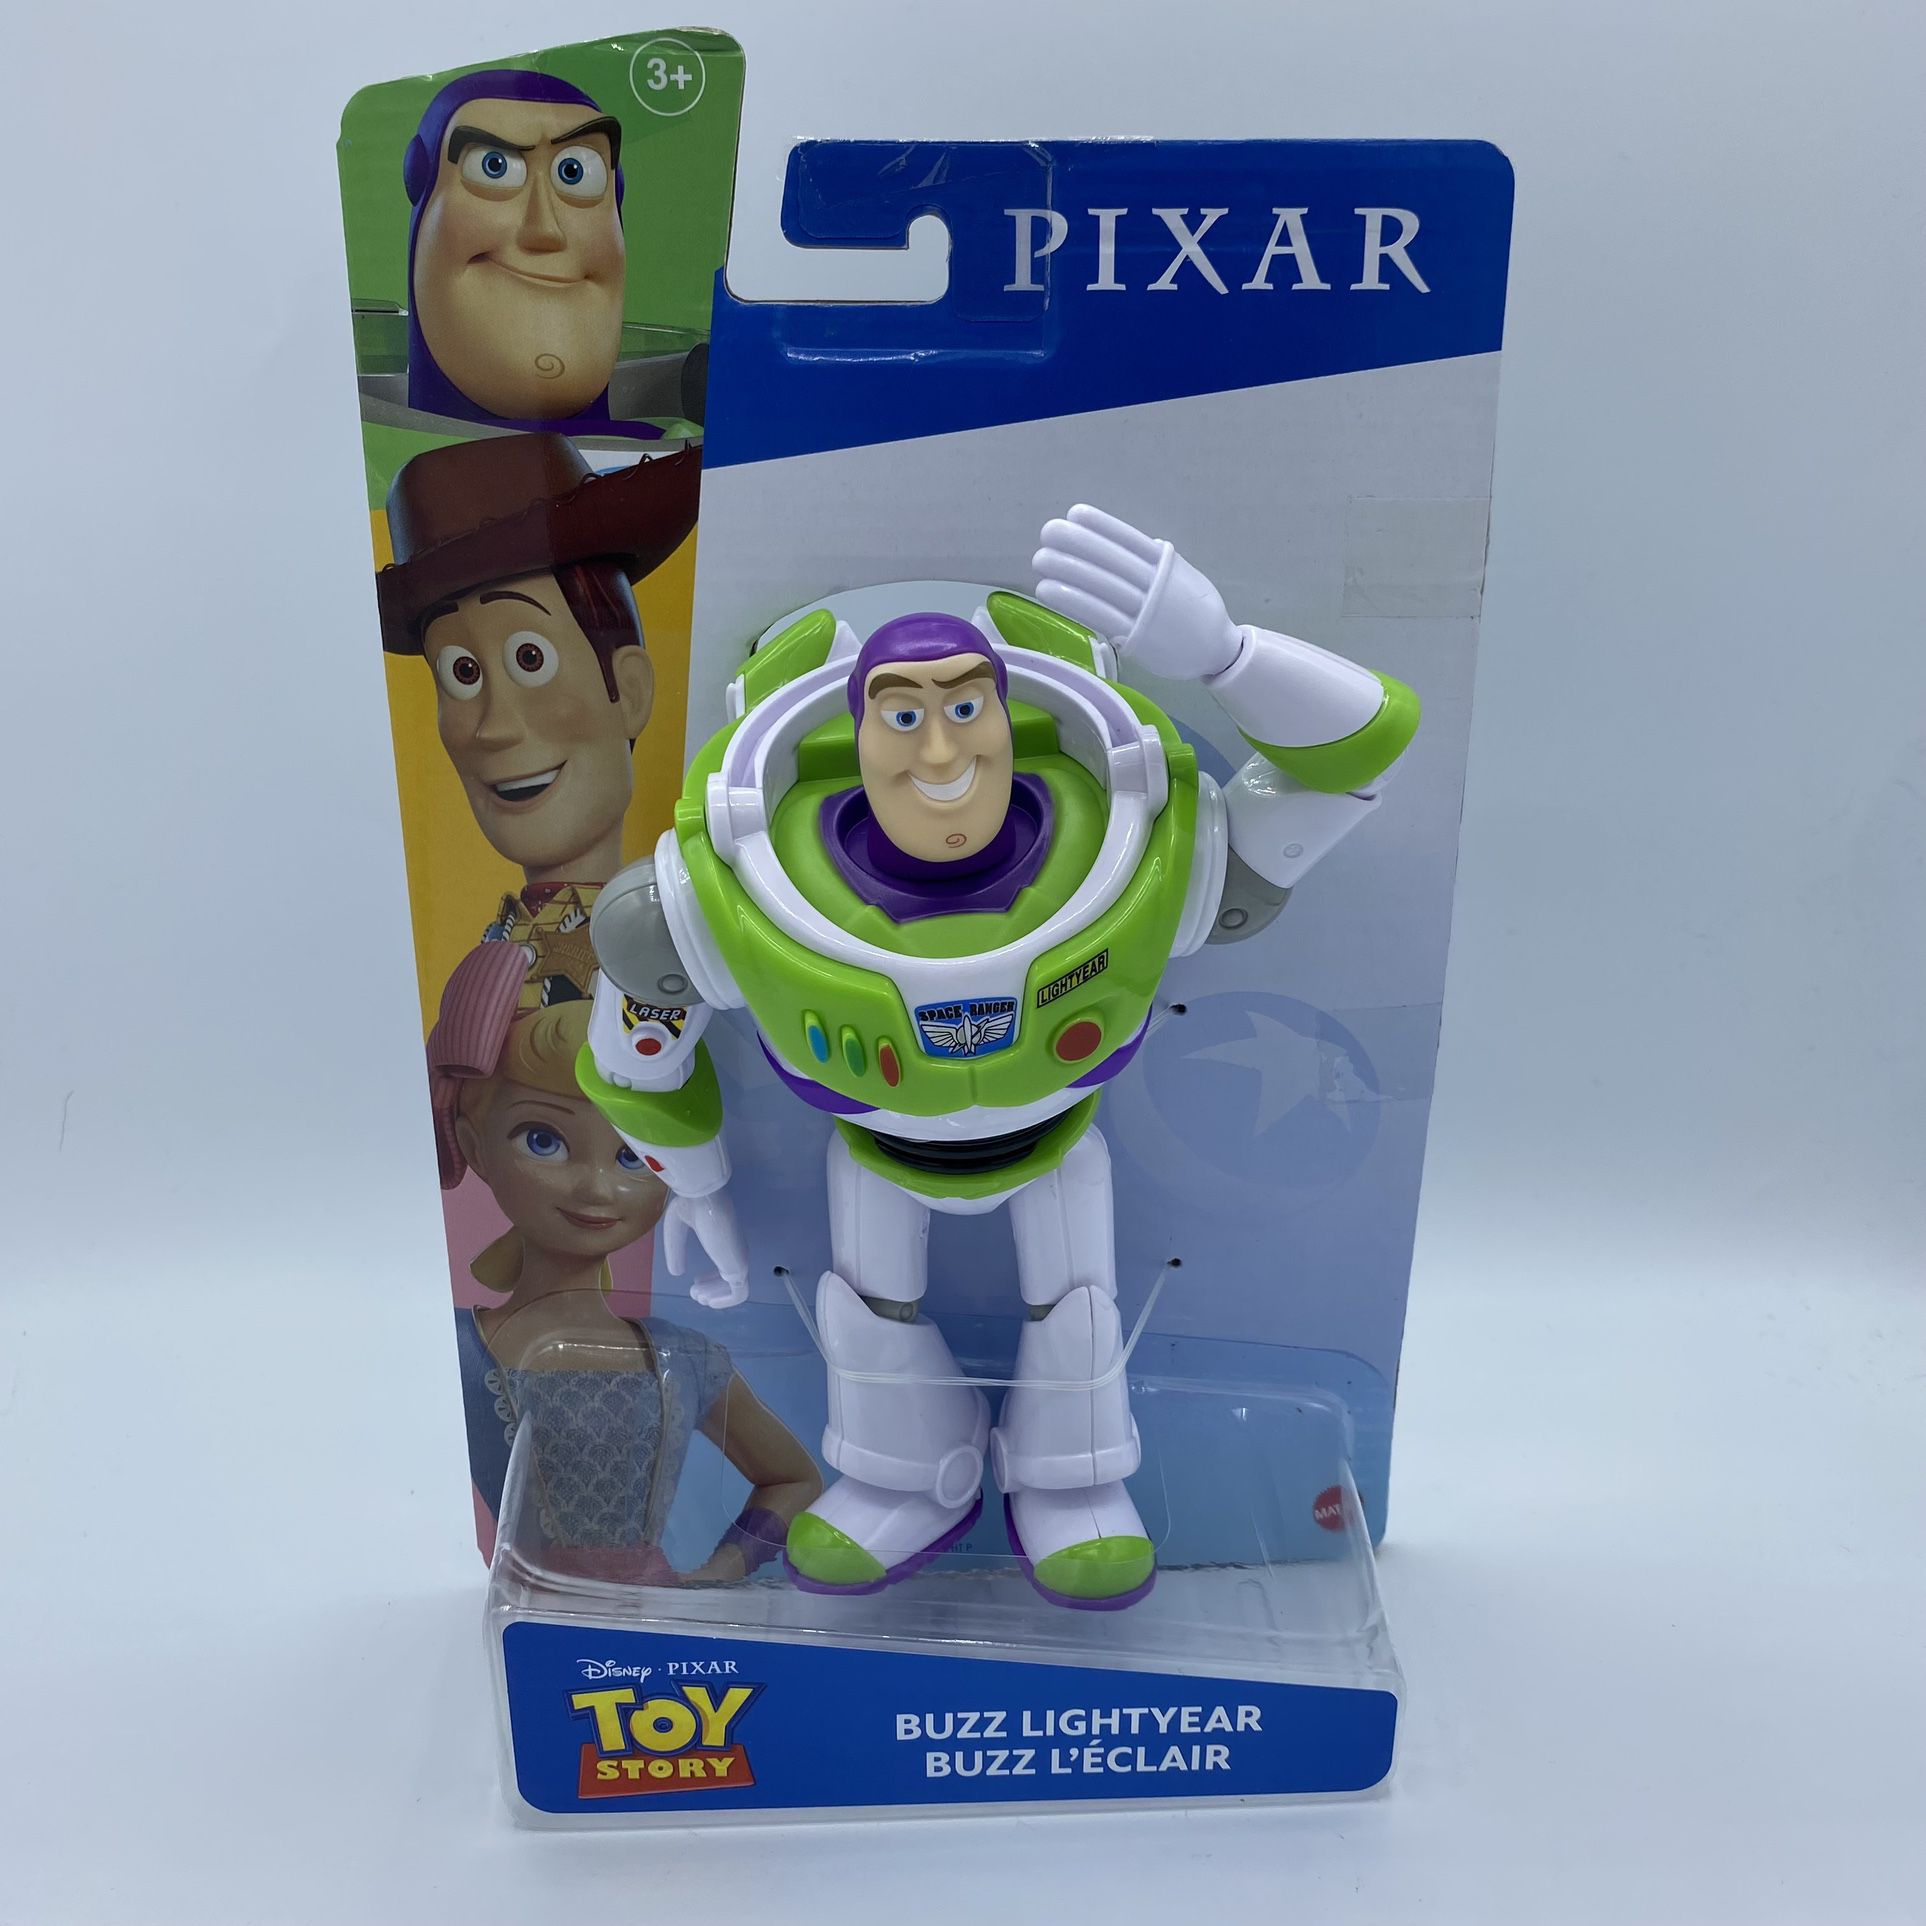 Toy Story Buzz Lightyear (7" Action Figure) toy, doll, gift, Disney, Mattel, NEW